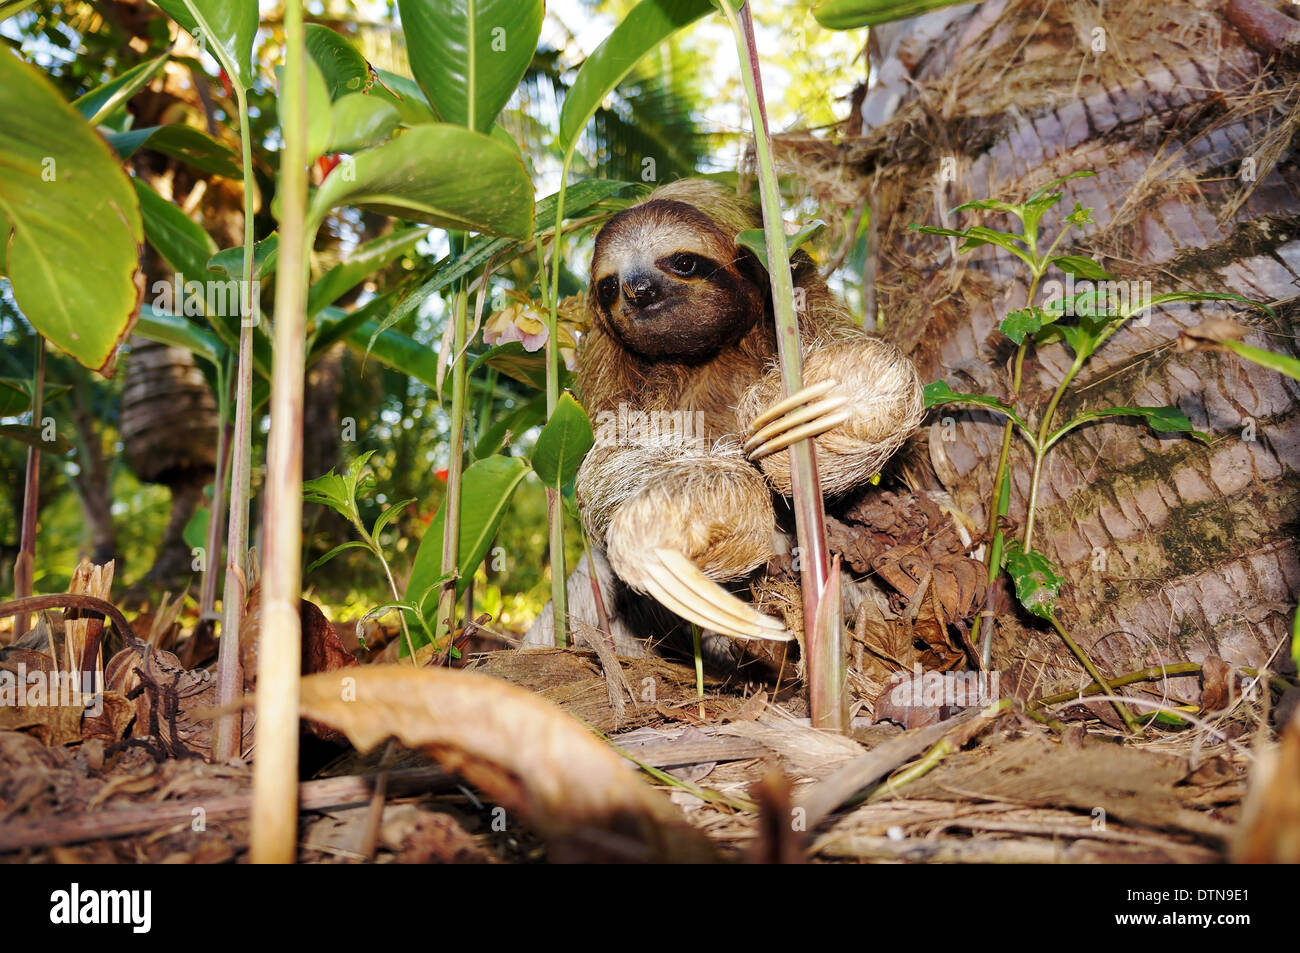 Three-toed sloth on the ground, Costa Rica, Central America Stock Photo